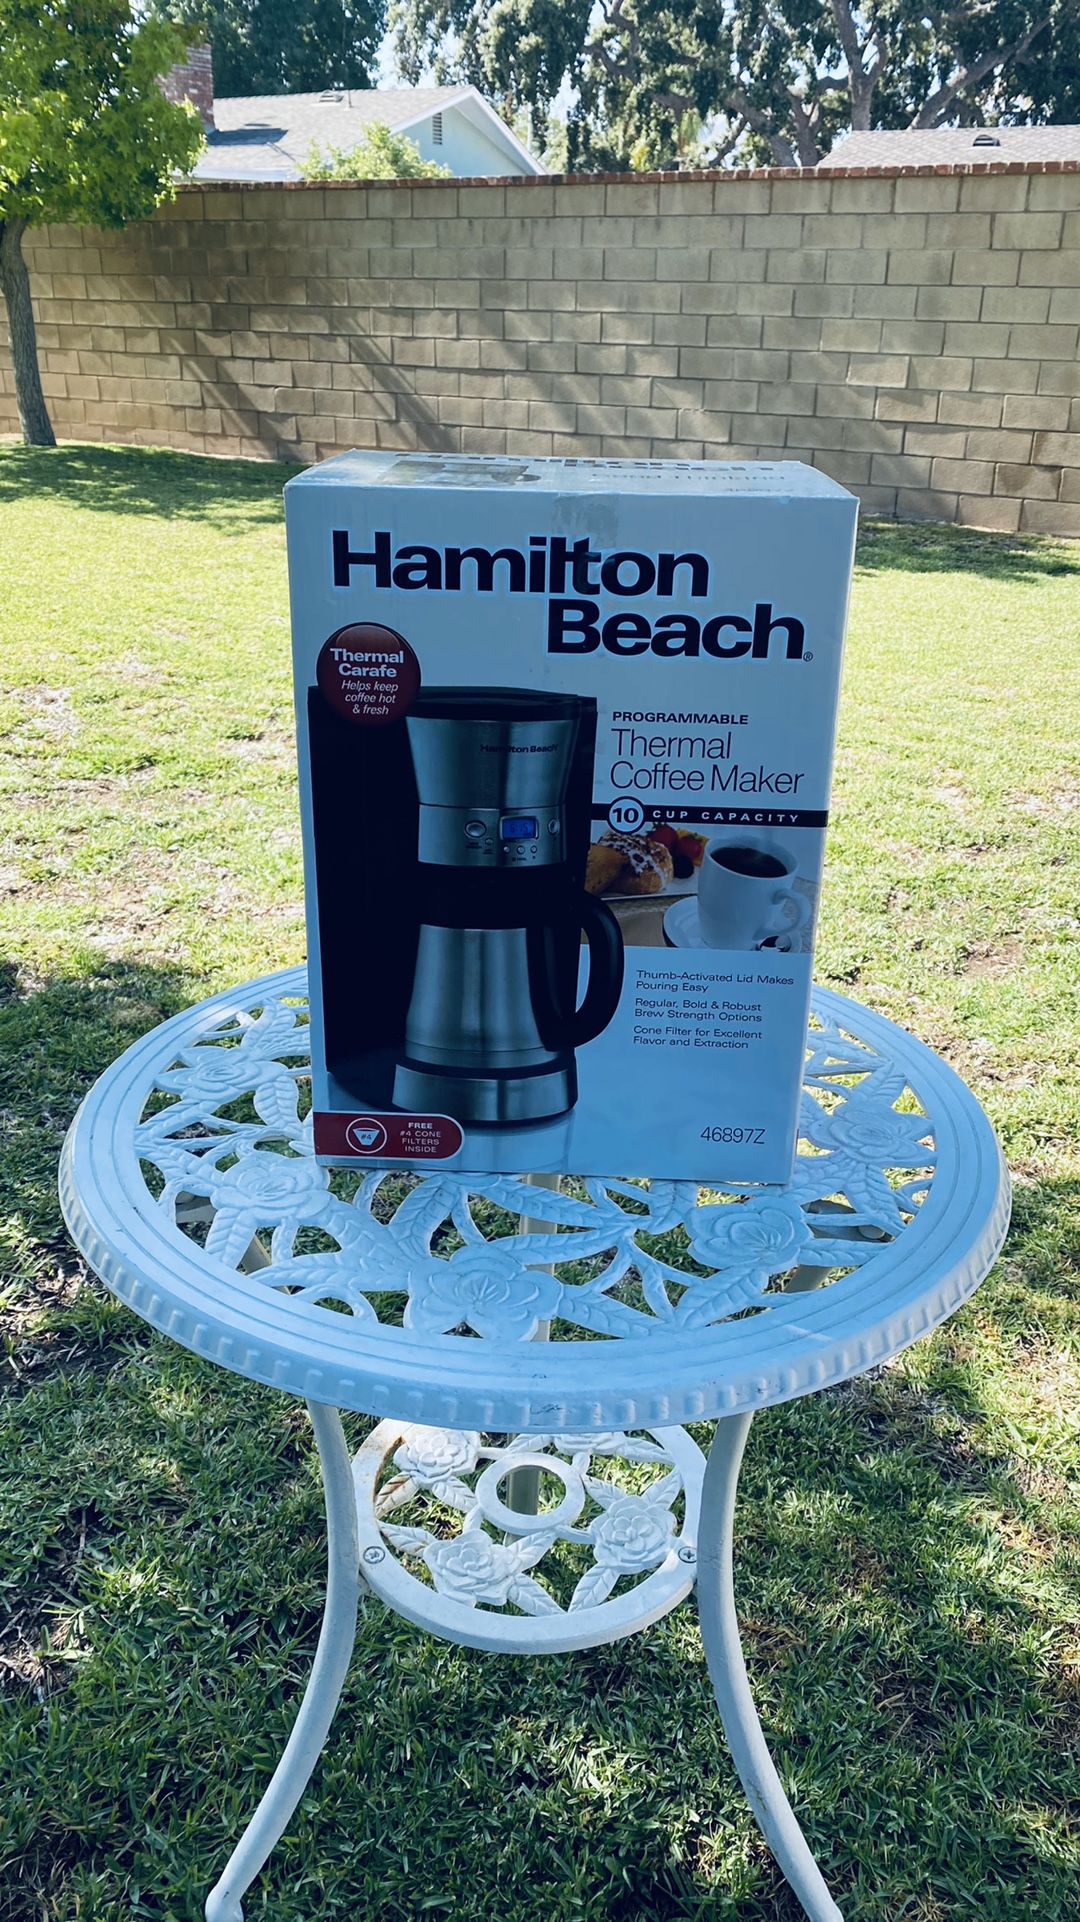 Hamilton Beach Programmable Thermal Coffee Maker, 10 Cups Capacity